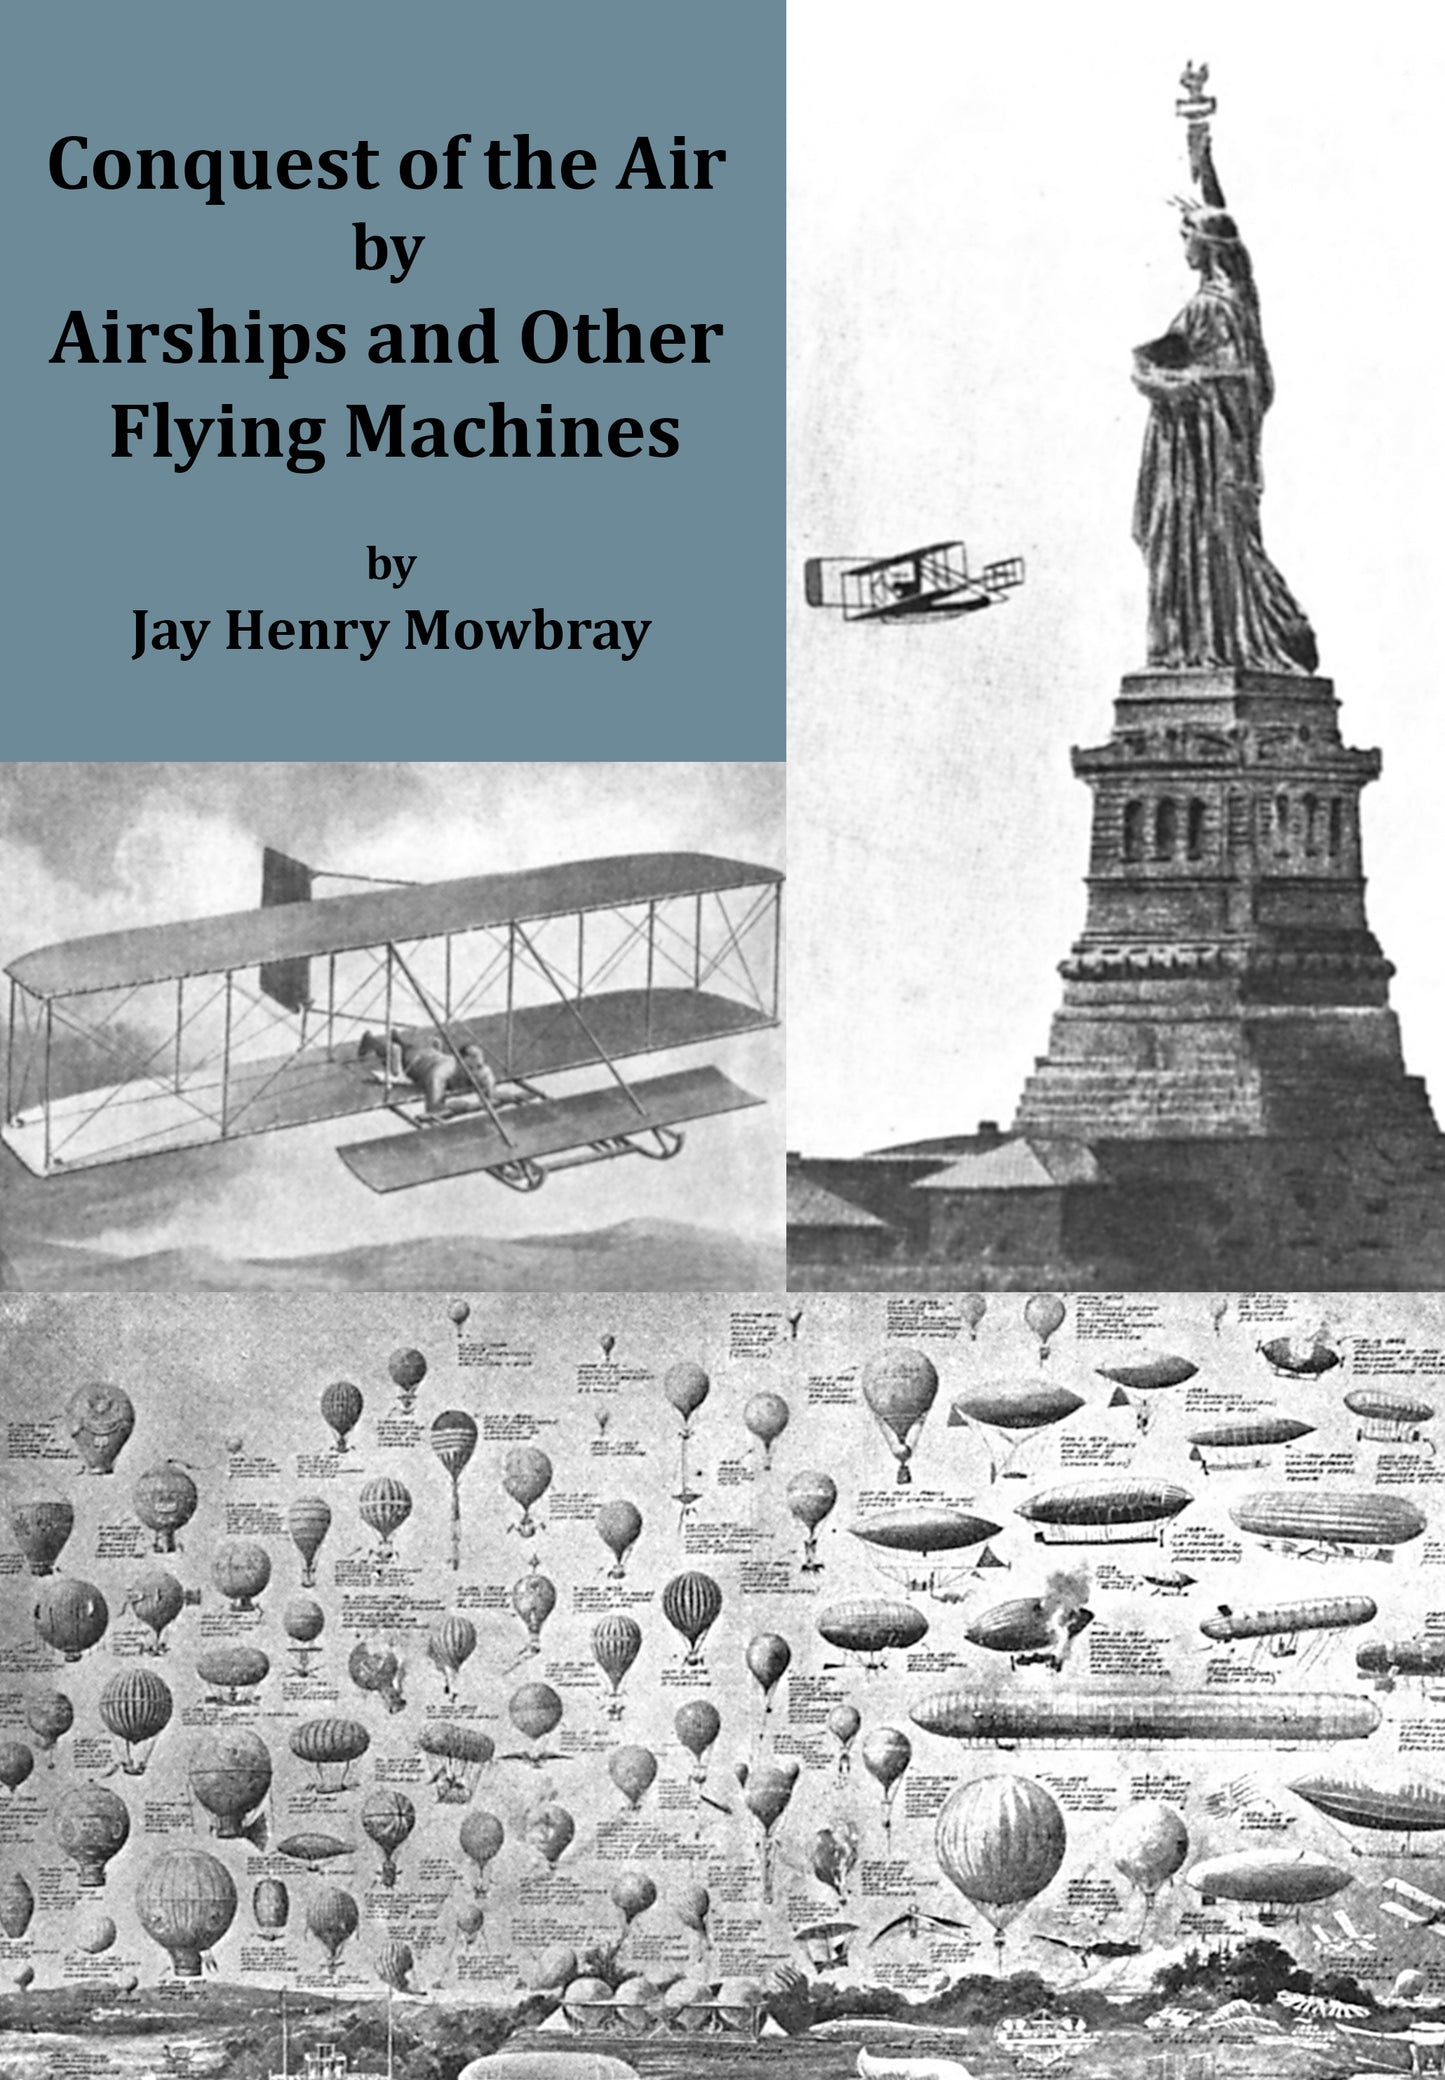 Conquest of the Air by Airships and Flying Machines